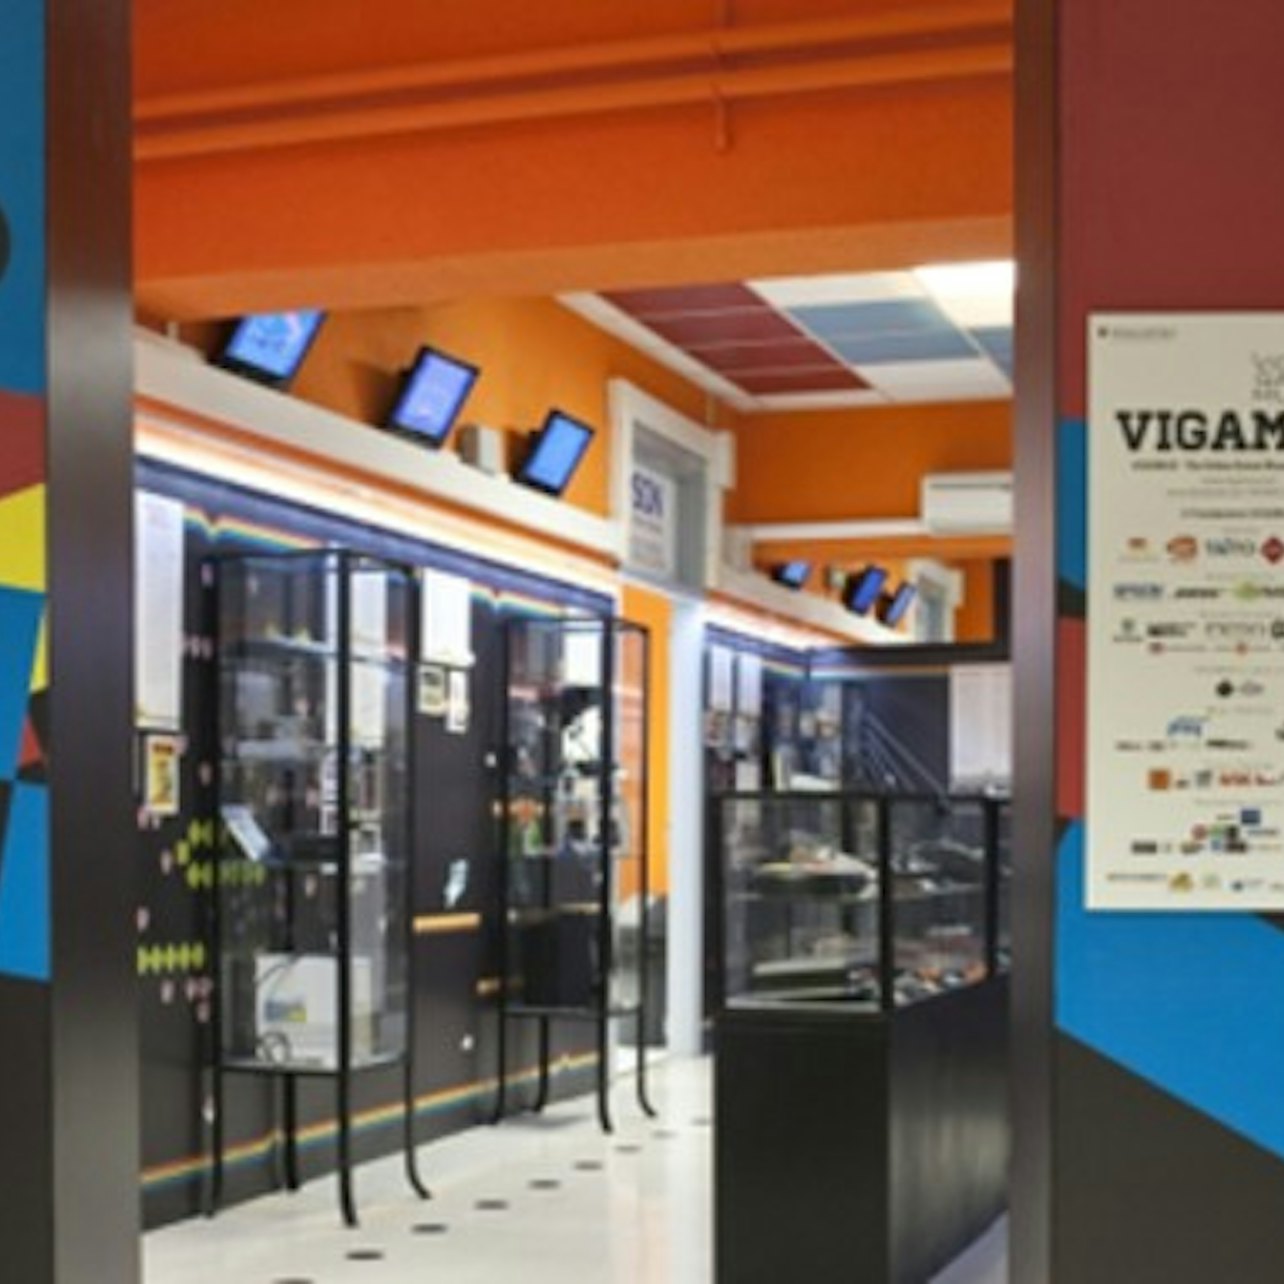 VIGAMUS – Video Game Museum of Rome - Accommodations in Rome